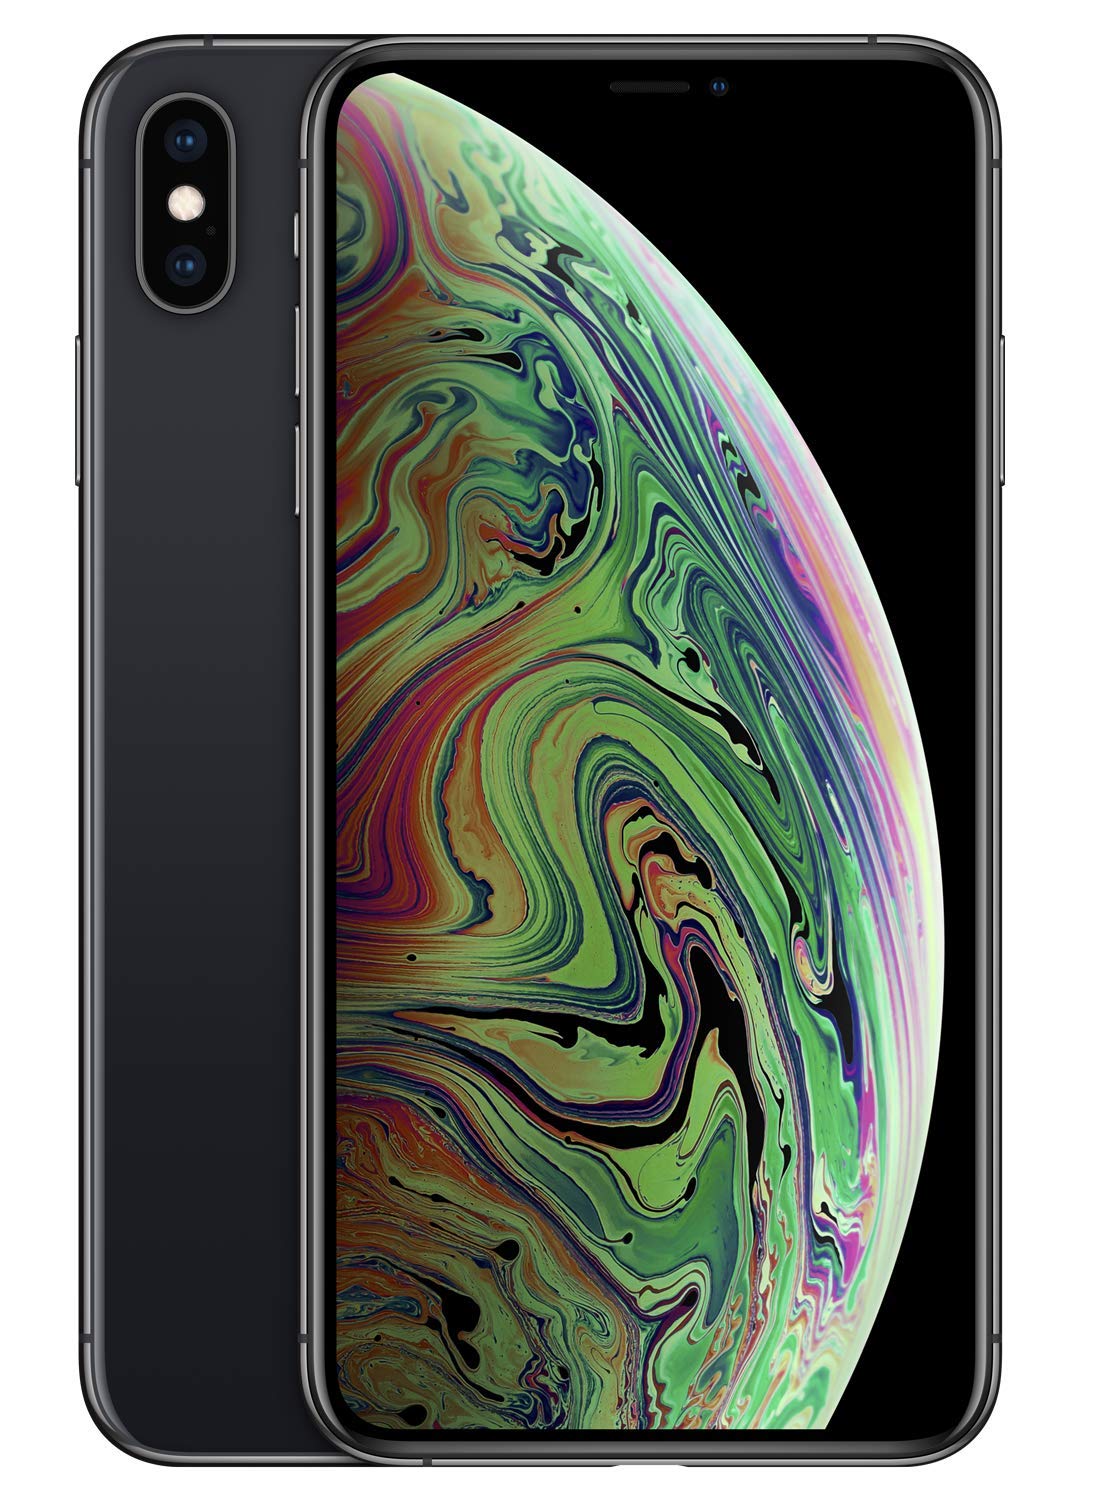 Pre-Owned Apple iPhone XS Max Fully Unlocked, Space Gray 256gb (Refurbished: Fair) - image 4 of 5